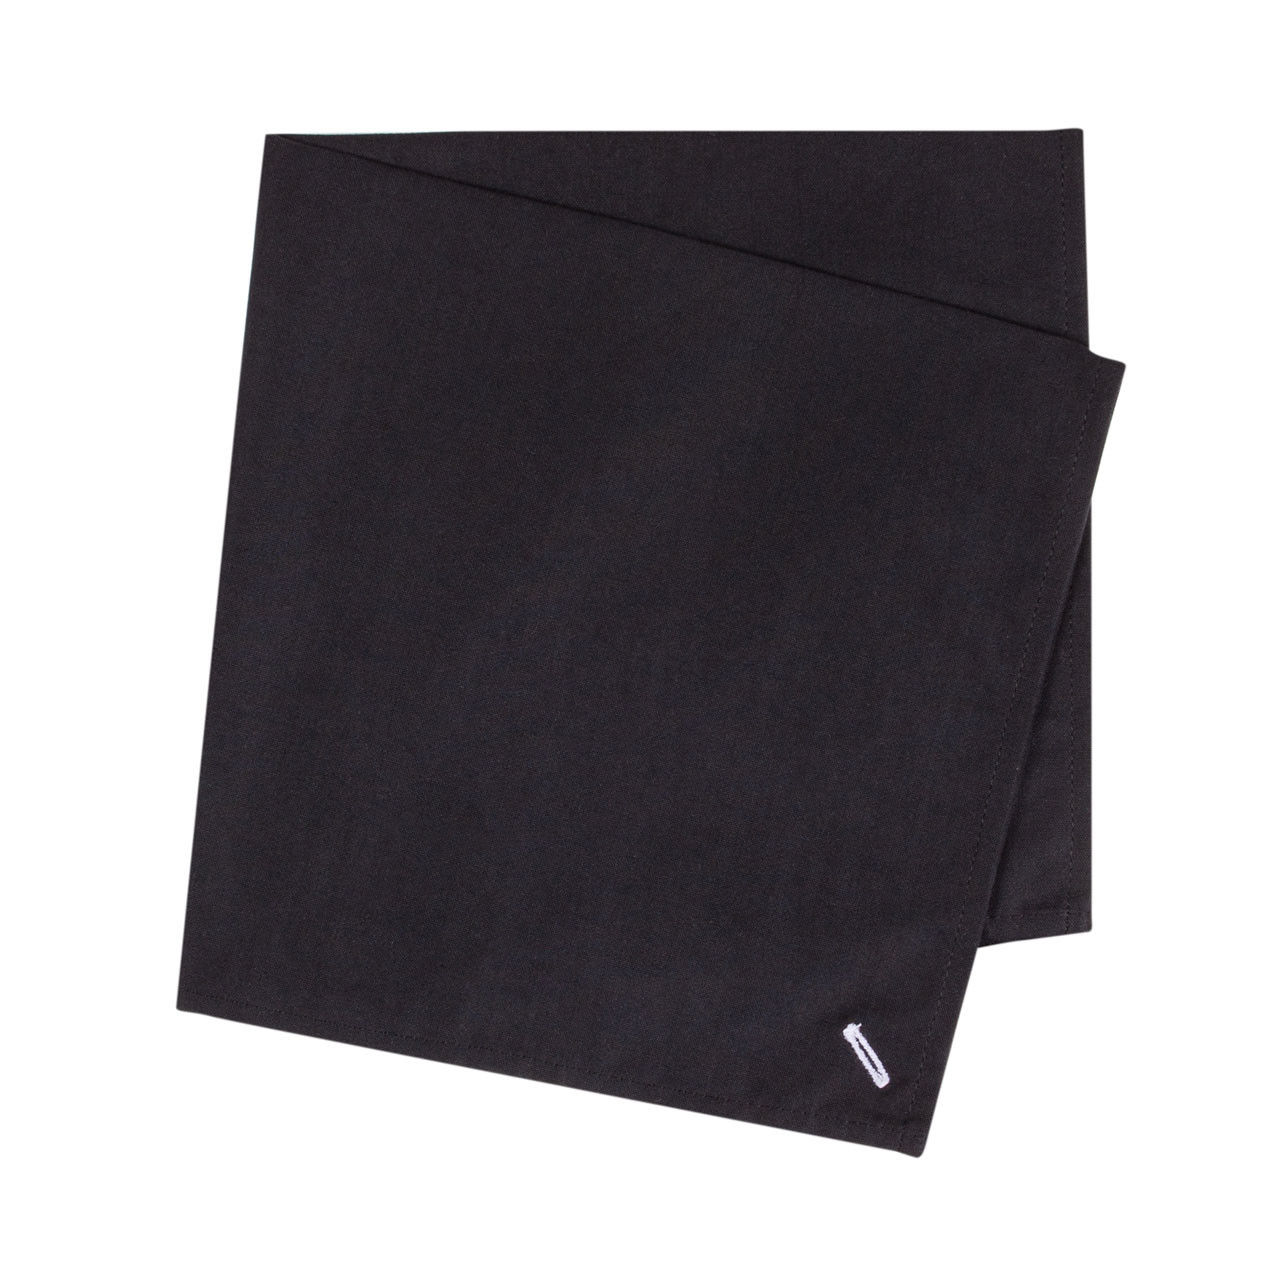 How have button hole napkins from Signature Plus significantly improved from the original?